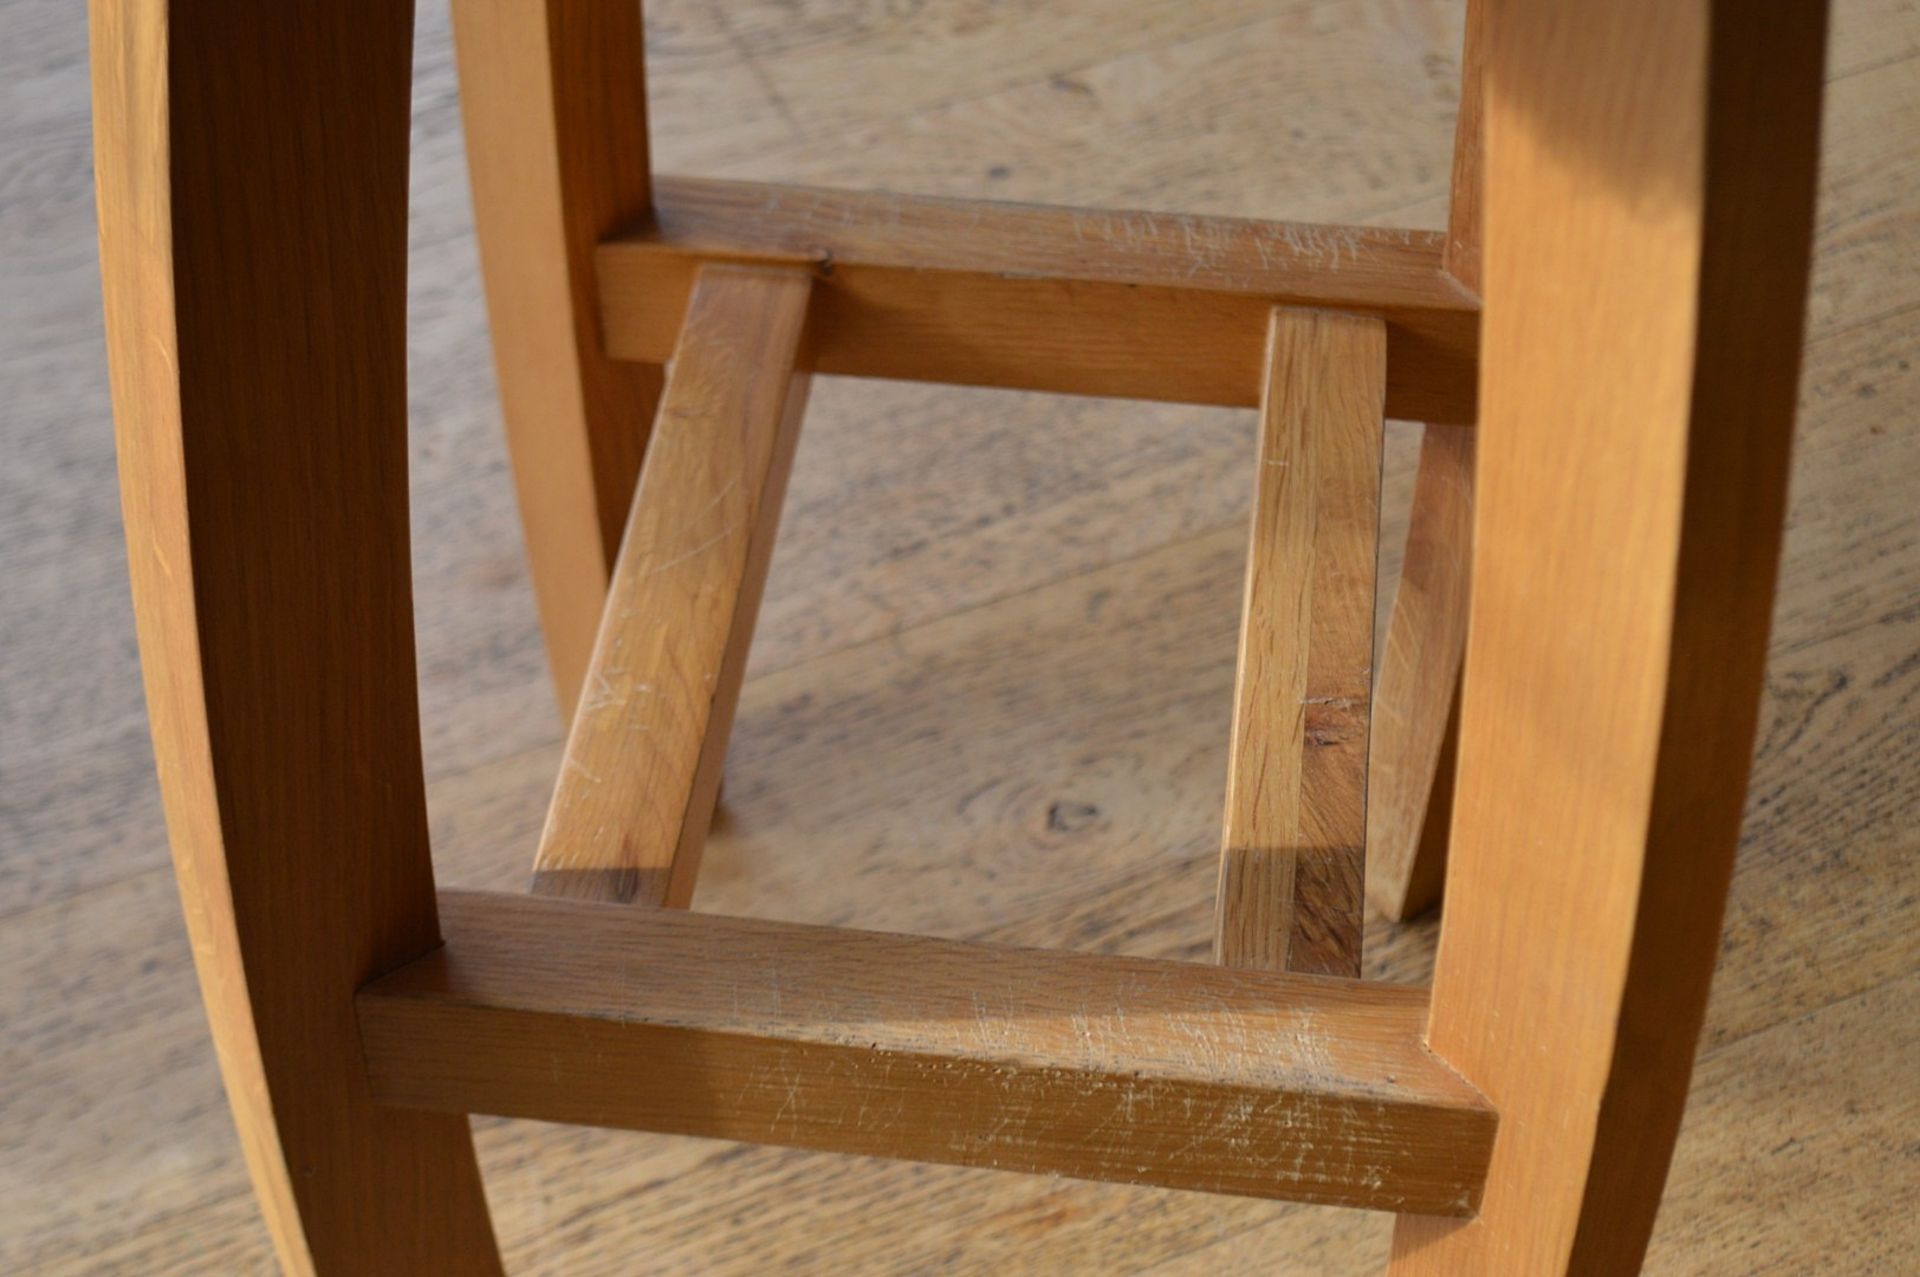 A Pair Of Solid Wood Stools With Removable Seat Covers - Dimensions: H73 x W35 x D35cm - NO VAT - Image 5 of 7